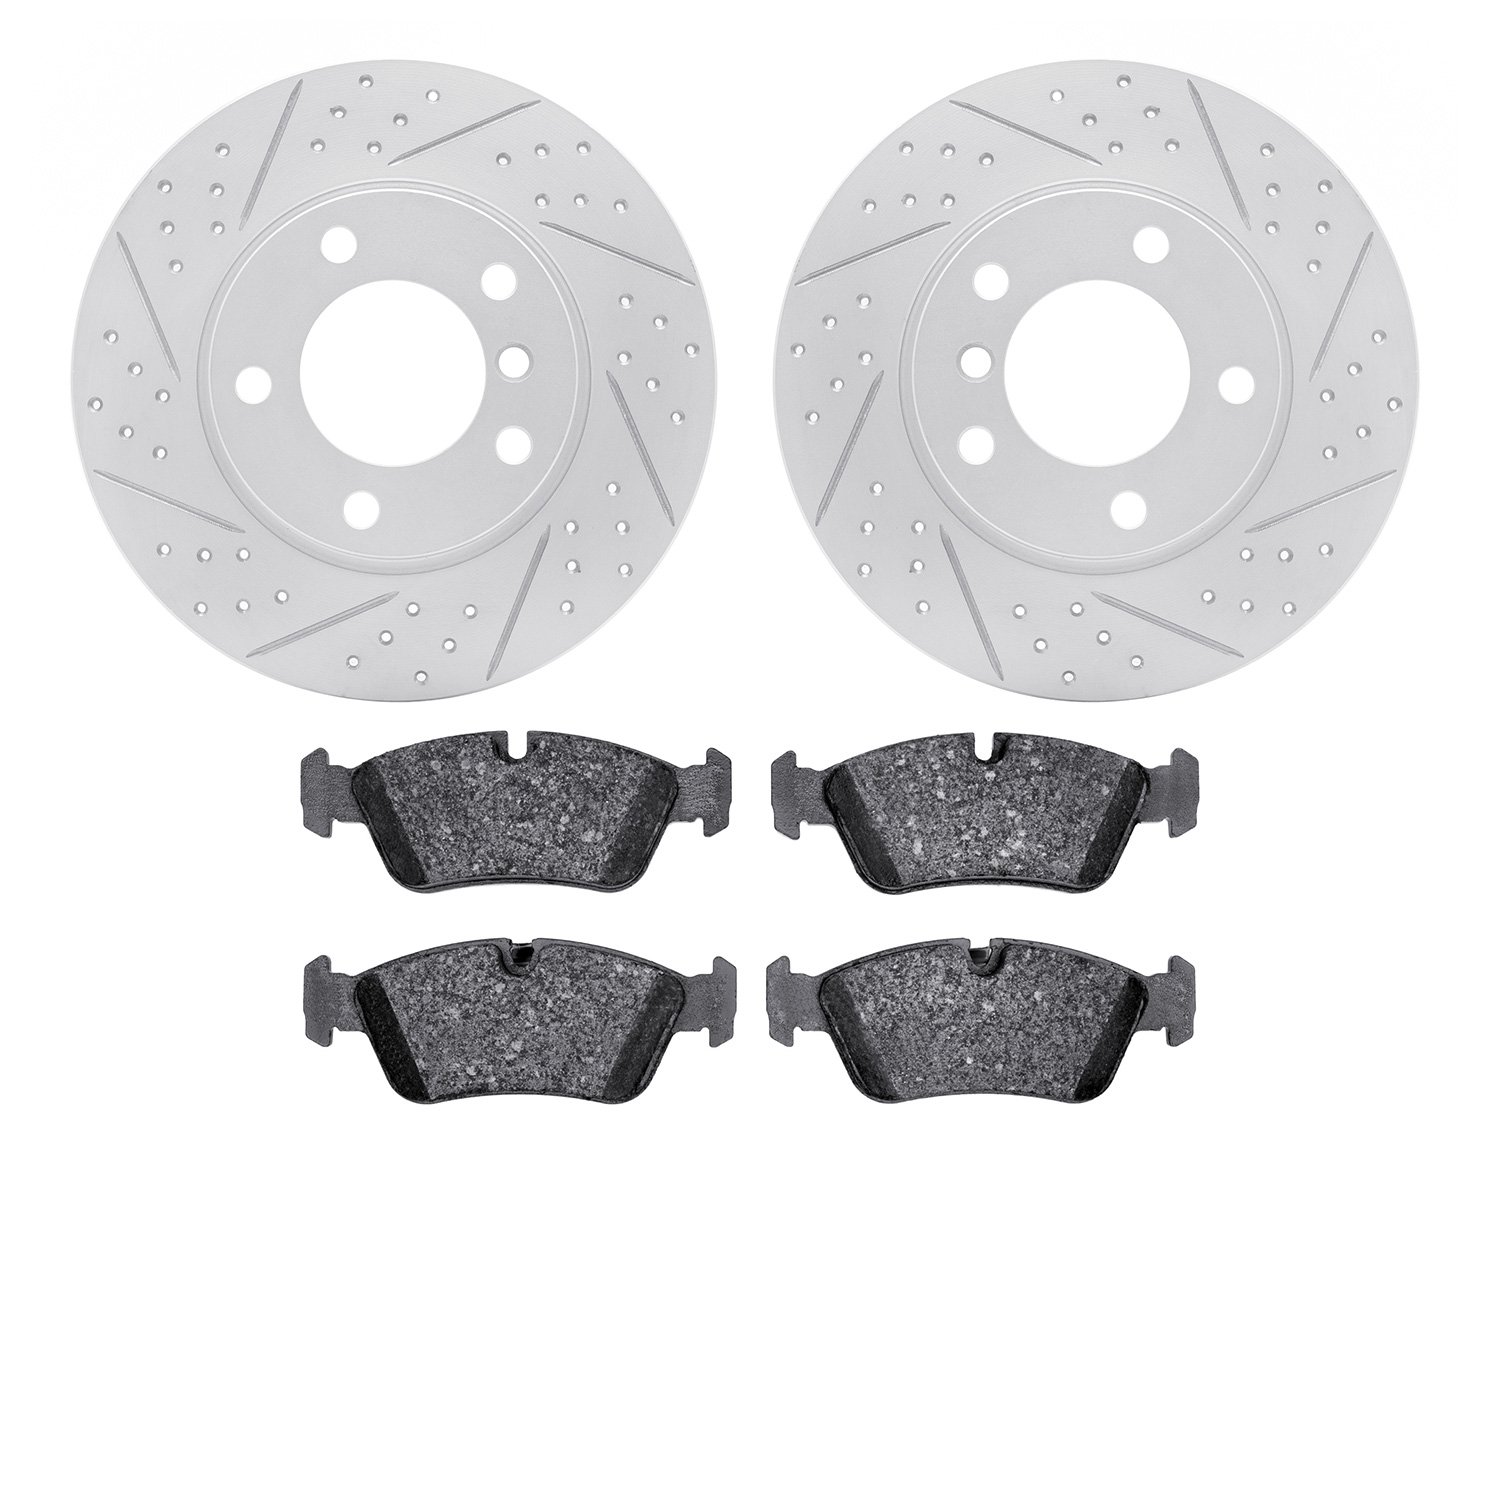 2602-31036 Geoperformance Drilled/Slotted Rotors w/5000 Euro Ceramic Brake Pads Kit, 1995-1998 BMW, Position: Front